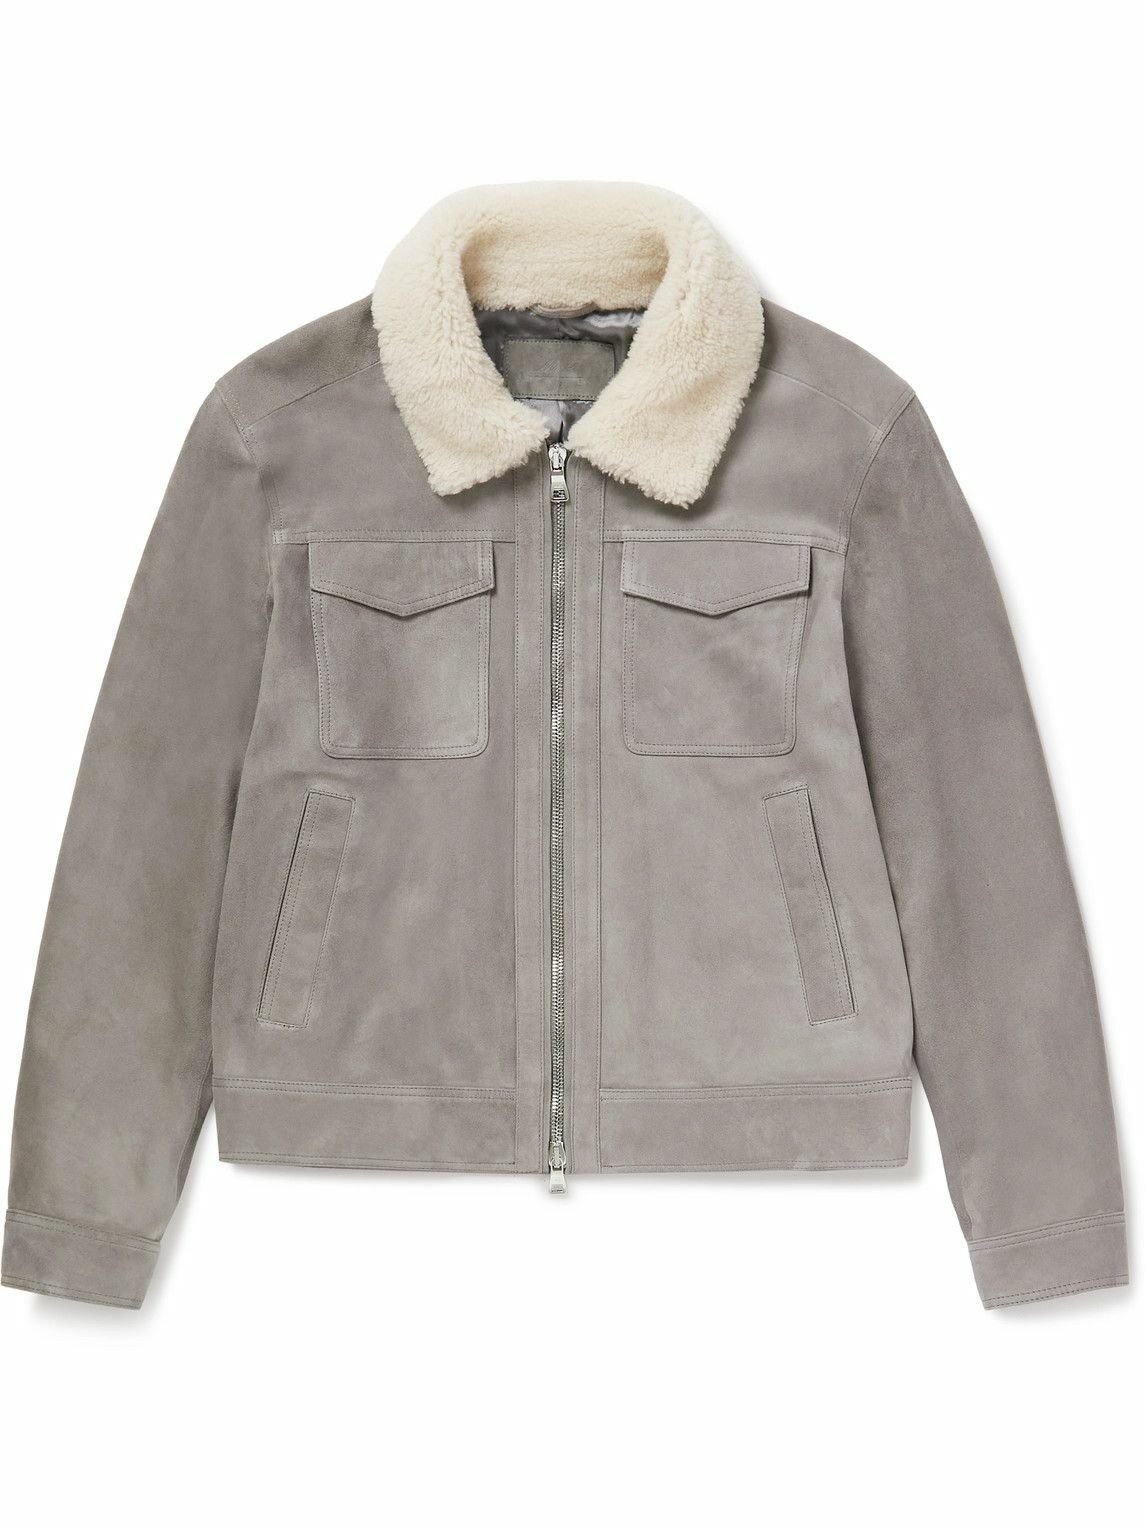 Photo: Mr P. - Shearling-Trimmed Suede Trucker Jacket - Gray